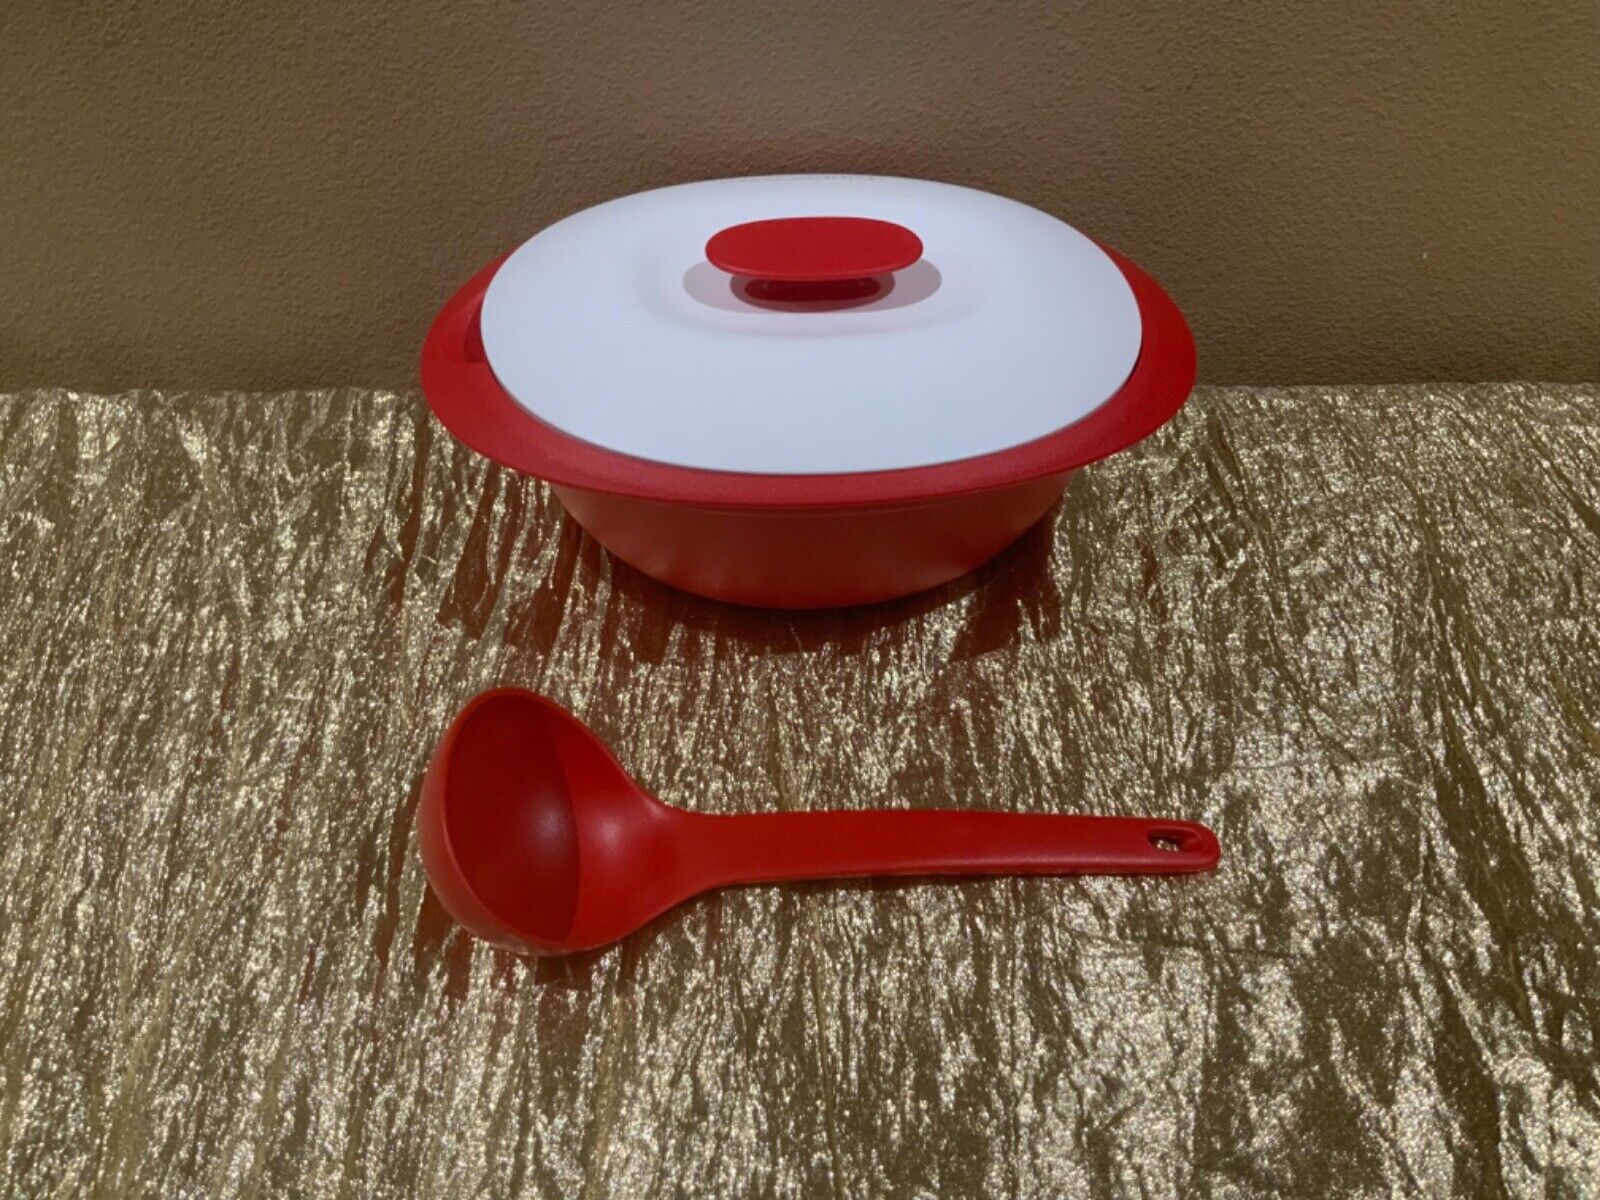 New UNIQUE Tupperware Legacy Rice and Soup Server Bowl w Scoop 1.8L Red Color